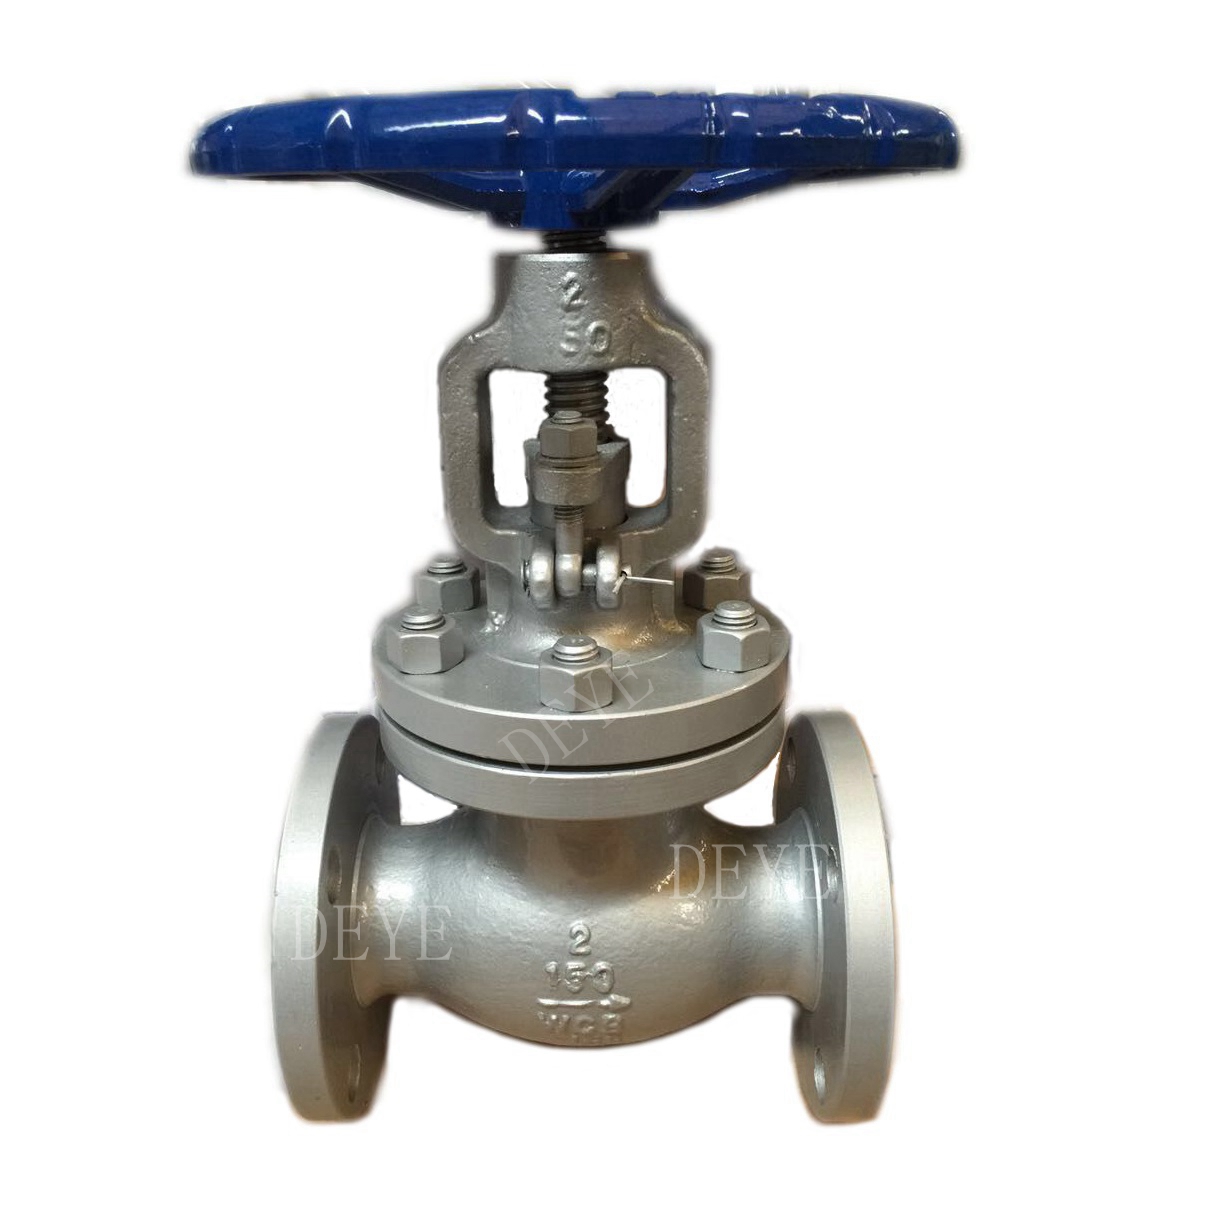 Factory directly supply Api Butterfly Valve -
 carbon steel A216 WCB 150LBS Globe Valve GVC-00150 – Deye